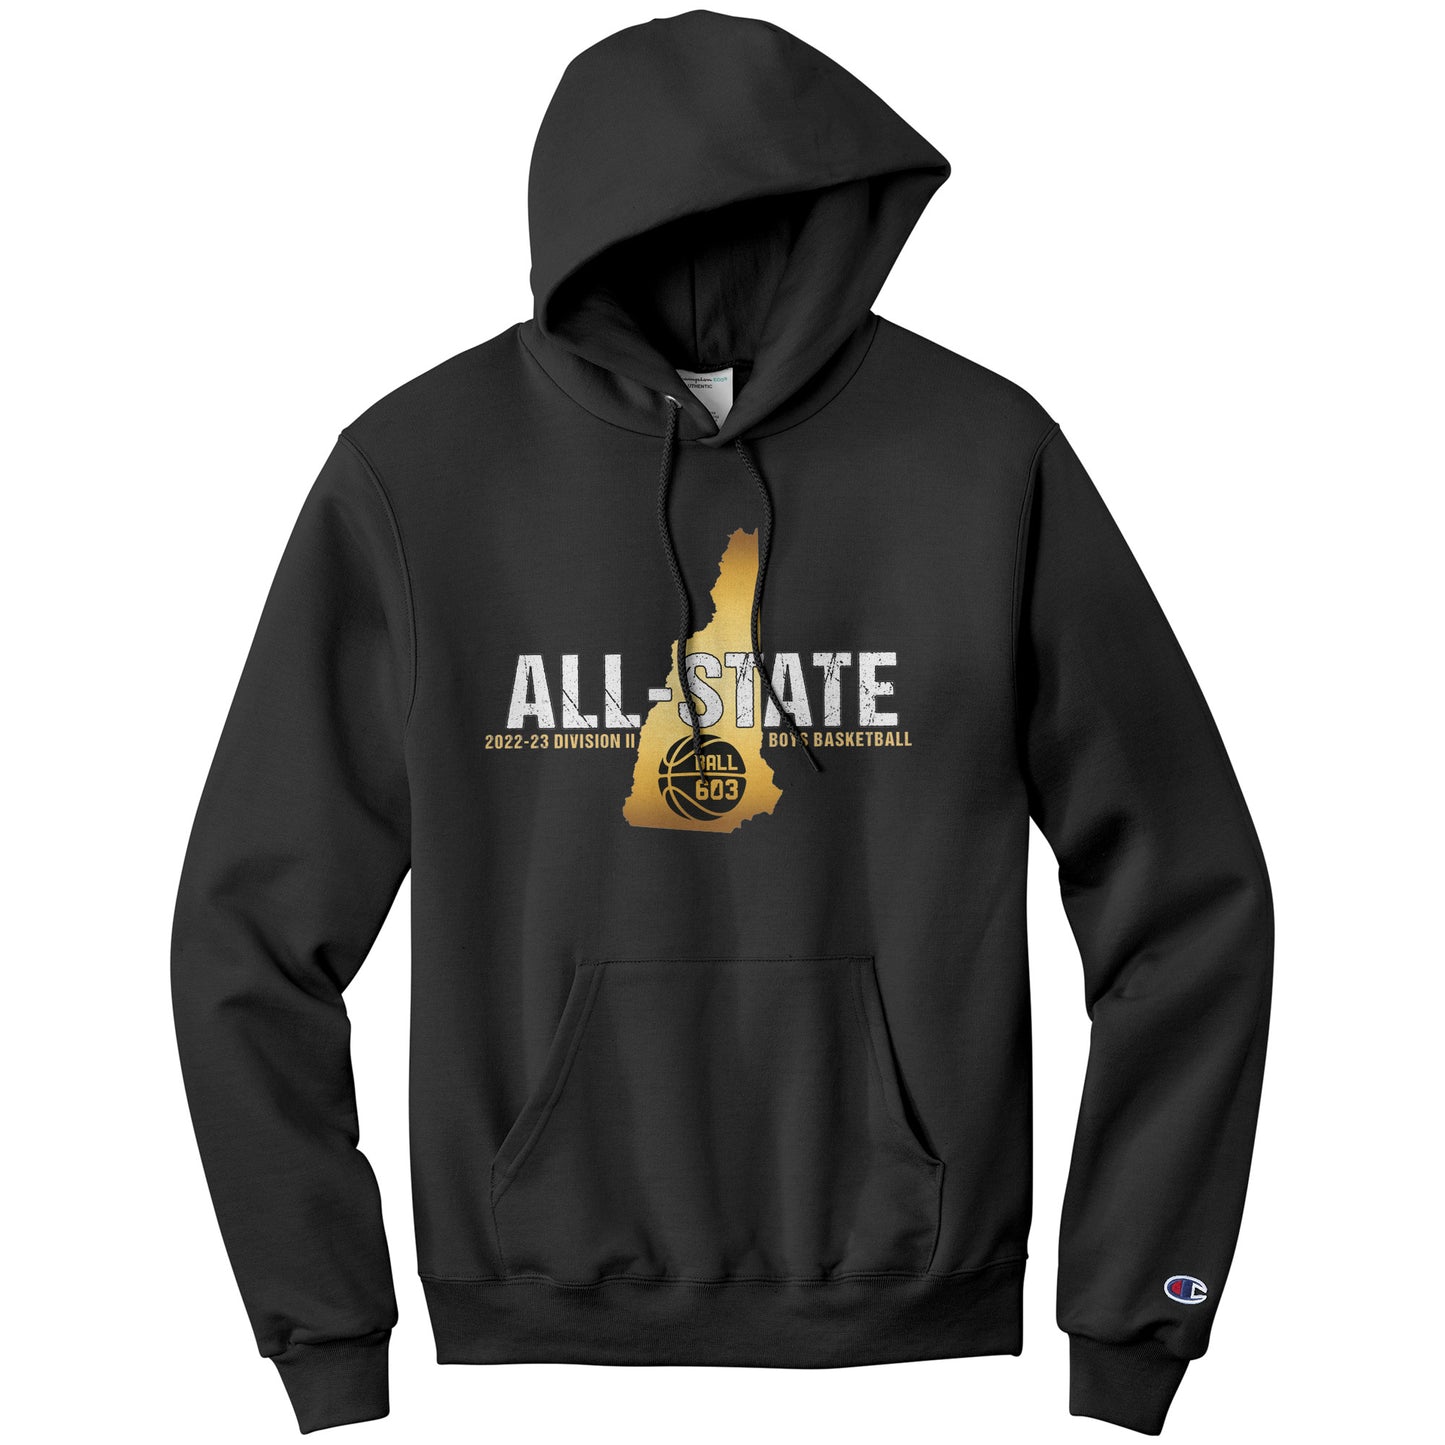 All-State D2 Boys: Champion Hoodie